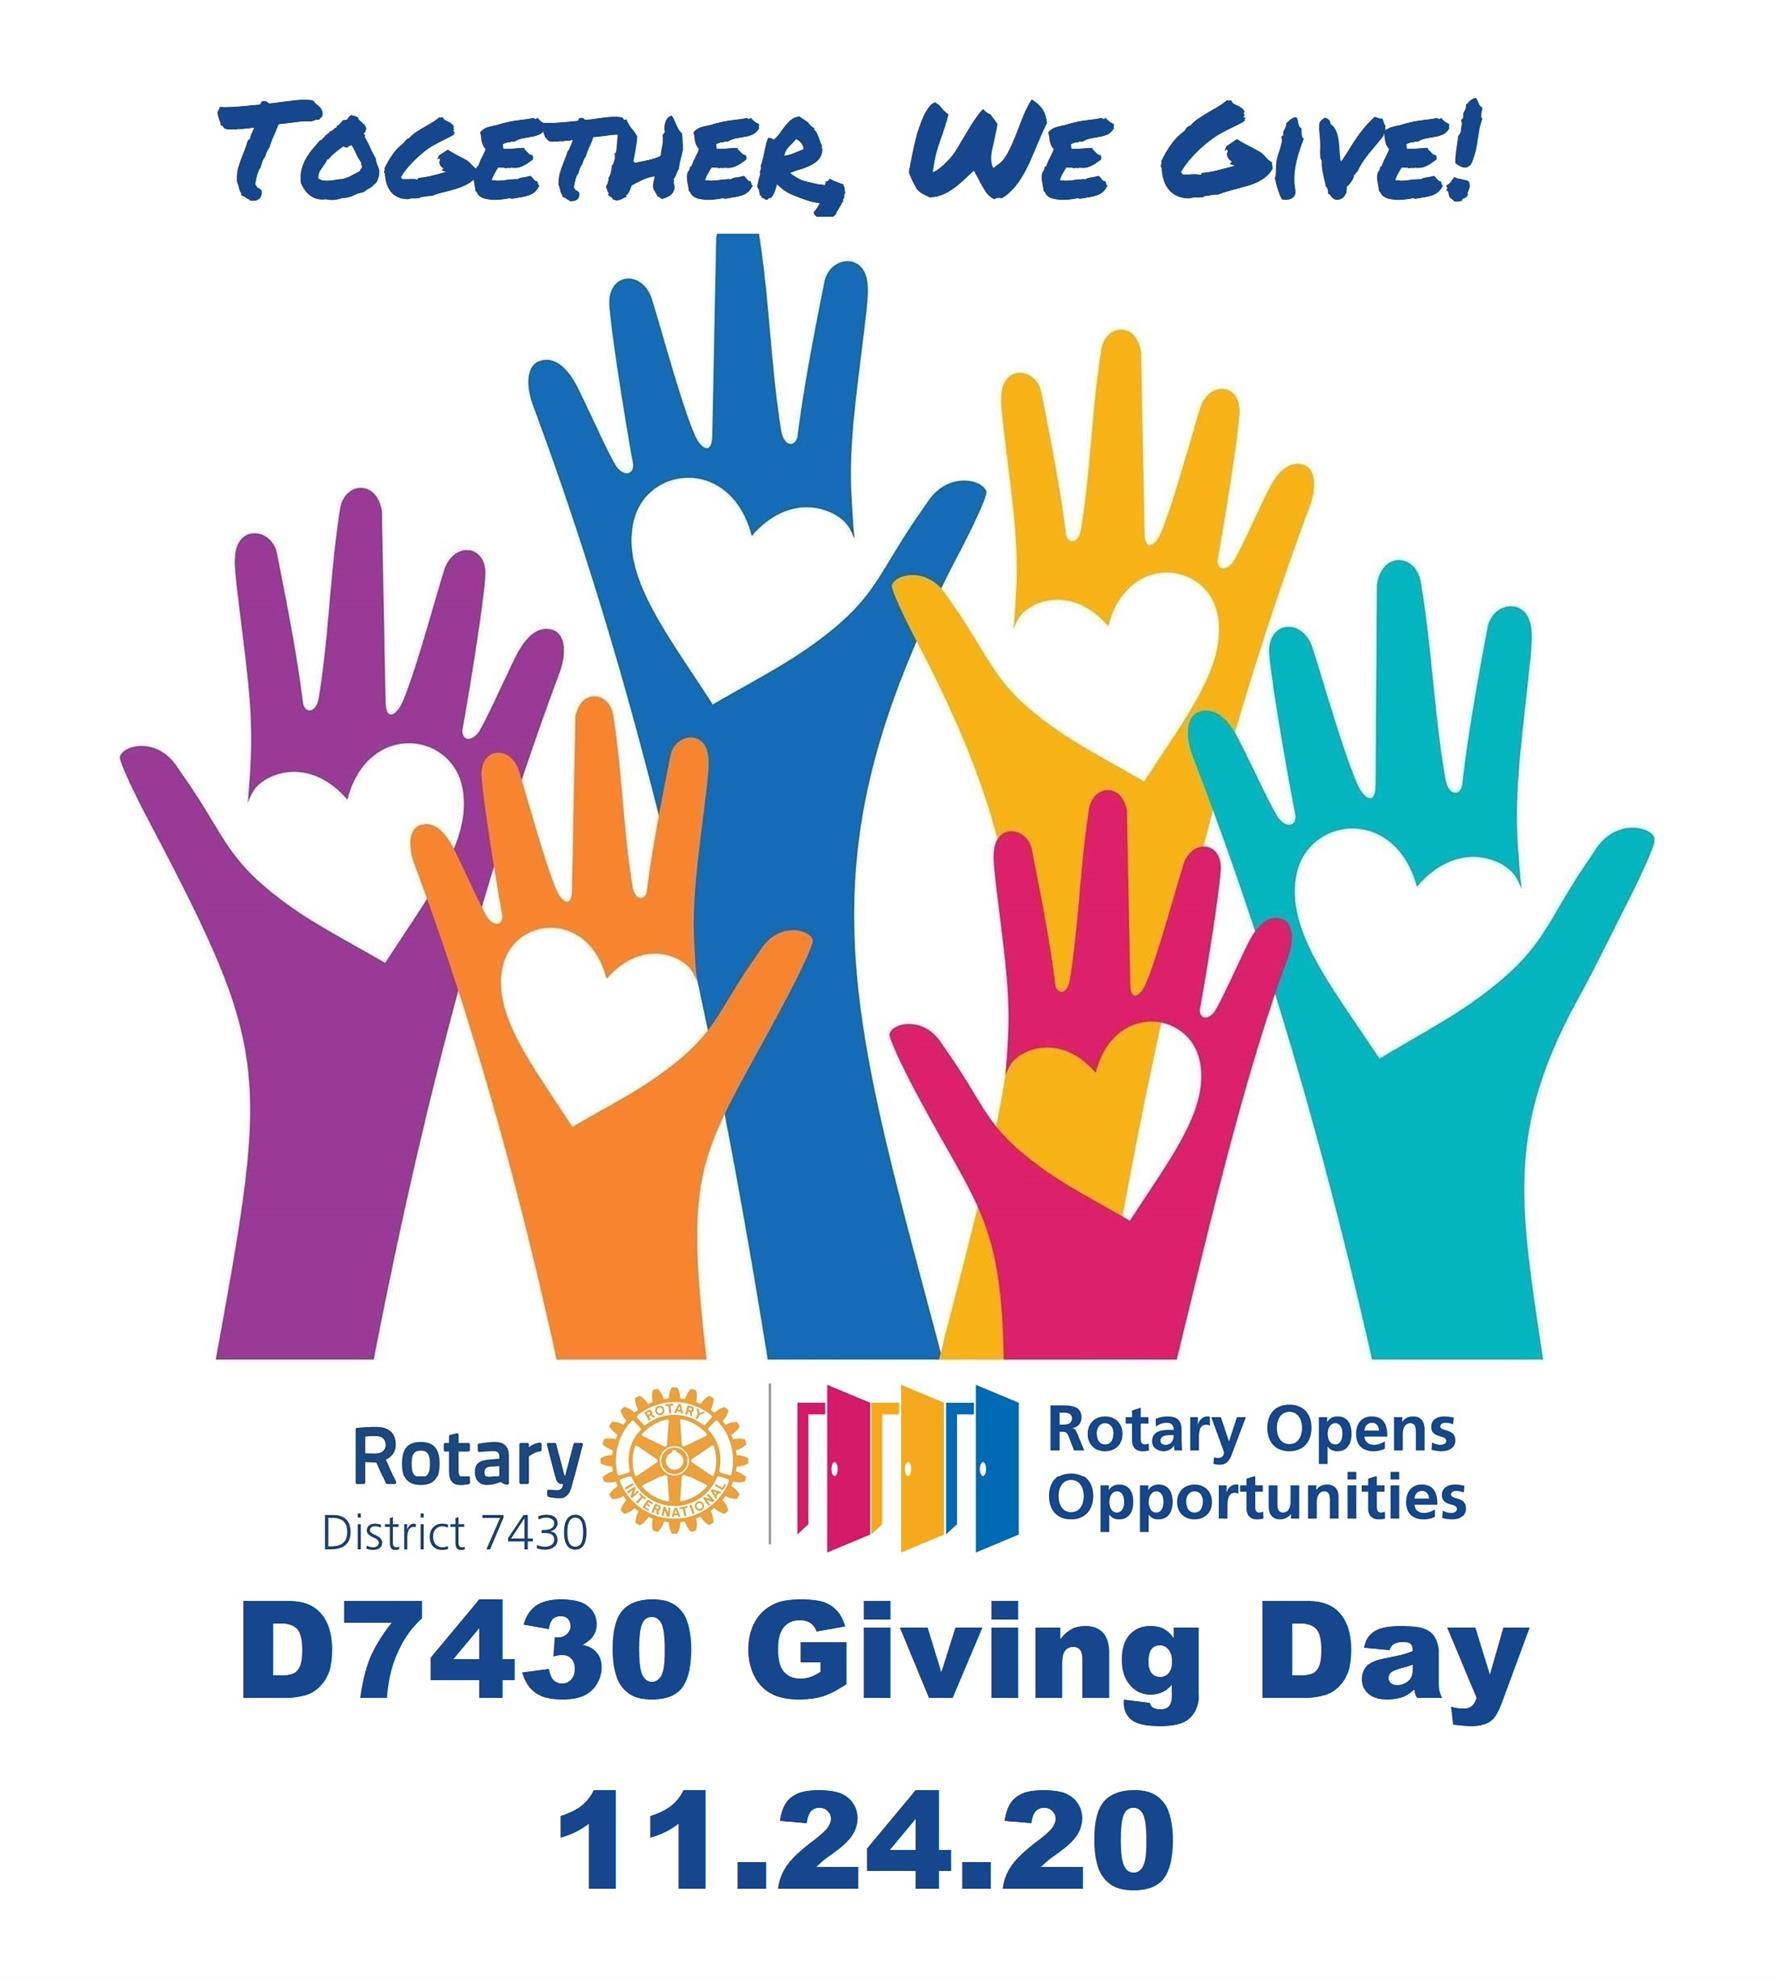 TODAY IS "Giving Day" Rotary Club of Allentown